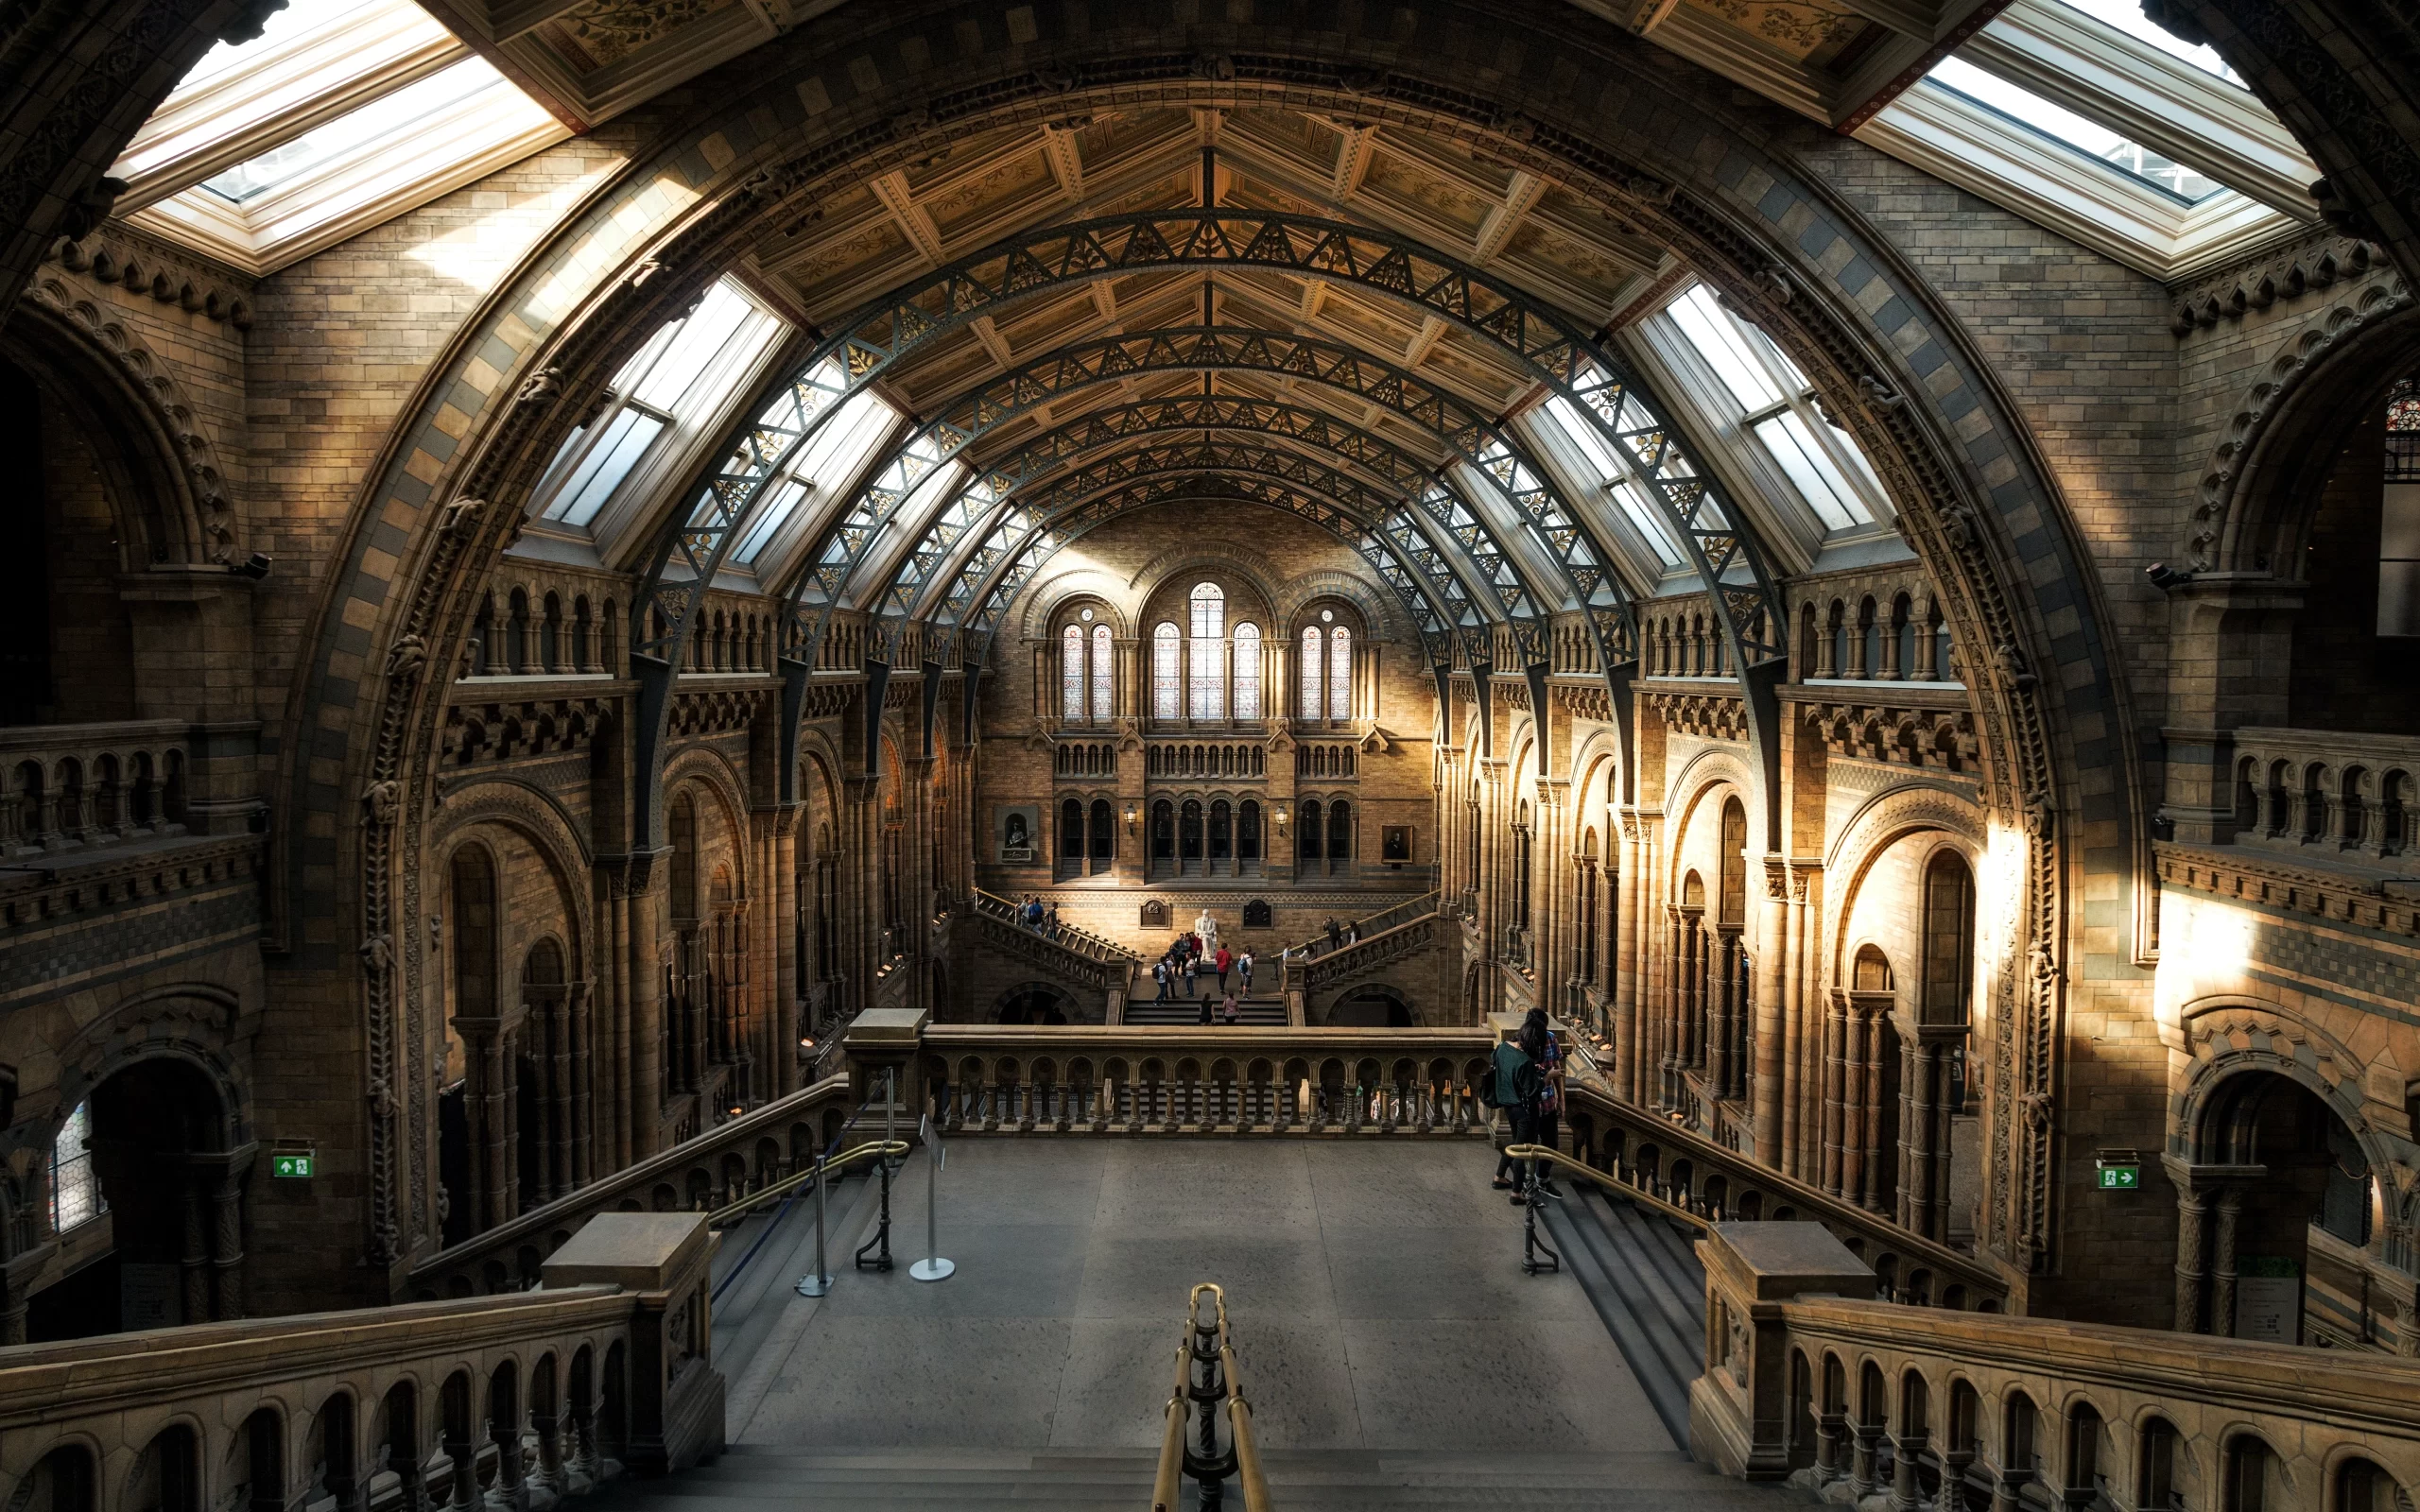 Natural History Museum, London, United Kingdom Published on April 2, 2017 Canon, EOS 70D Free to use under the Unsplash License